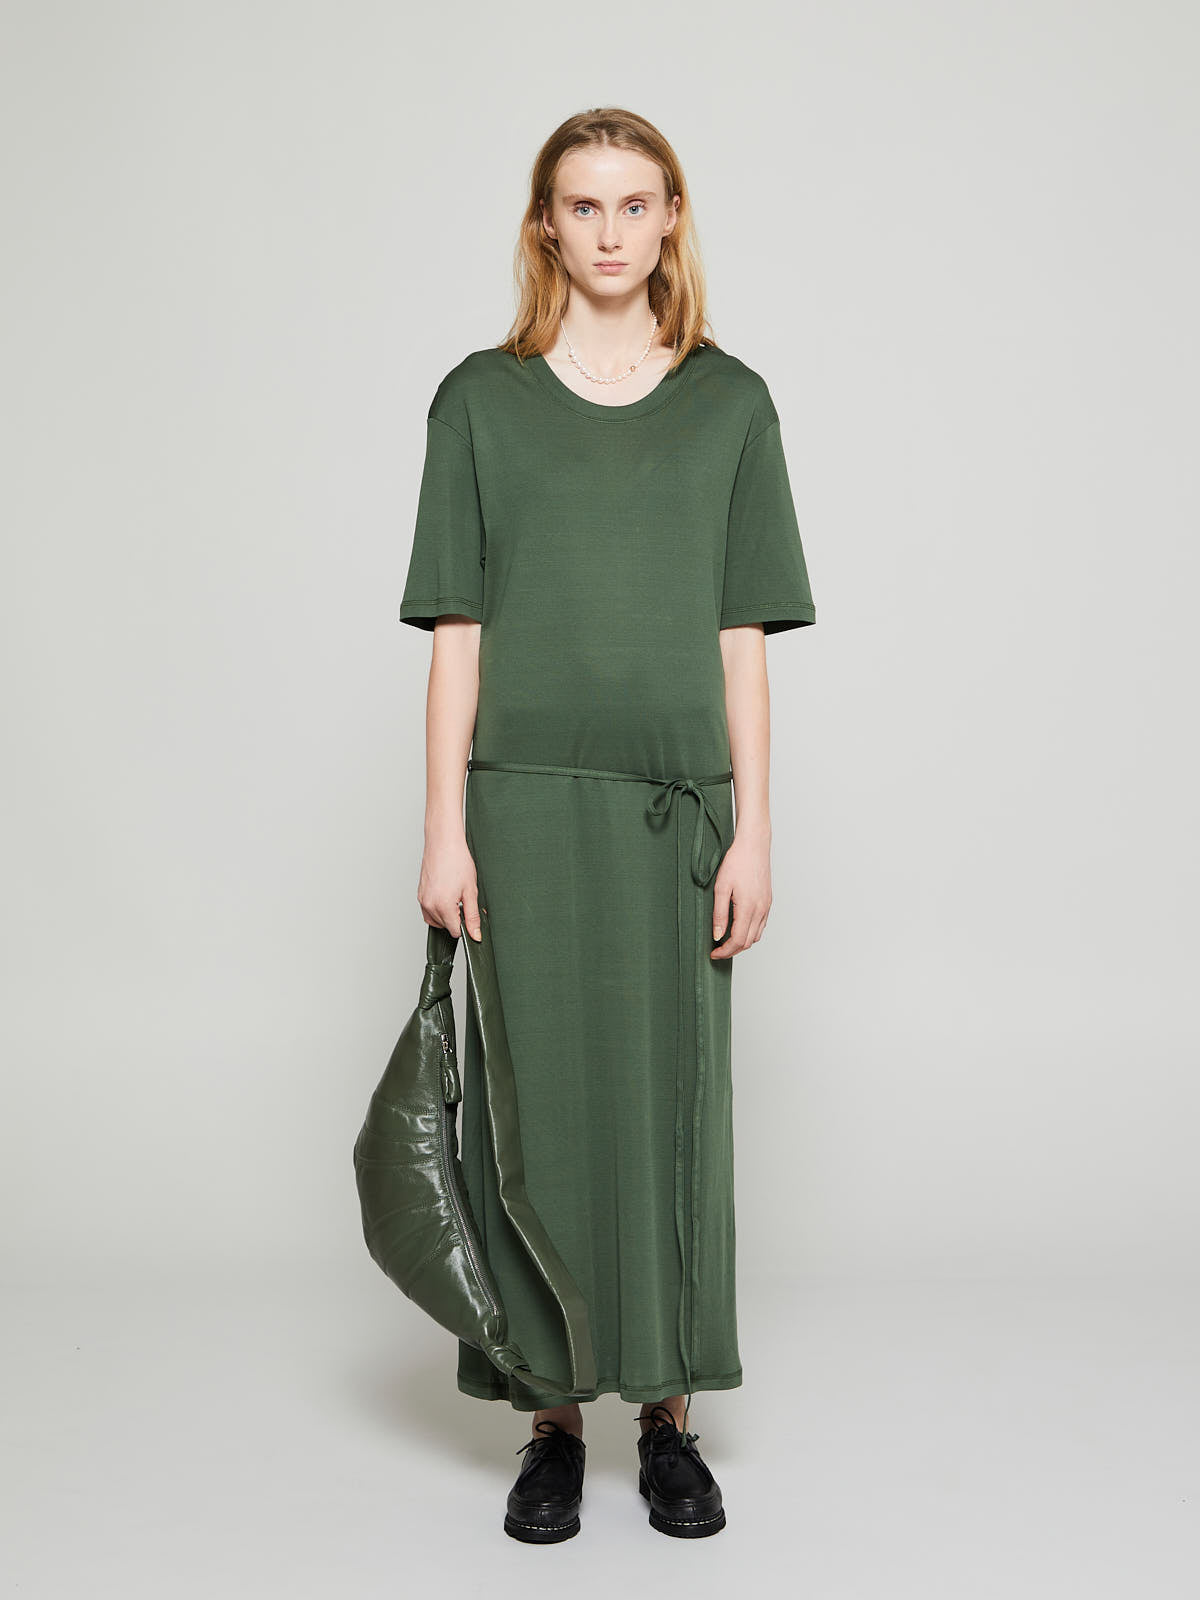 Belted Rib T-Shirt Dress in Smoky Green